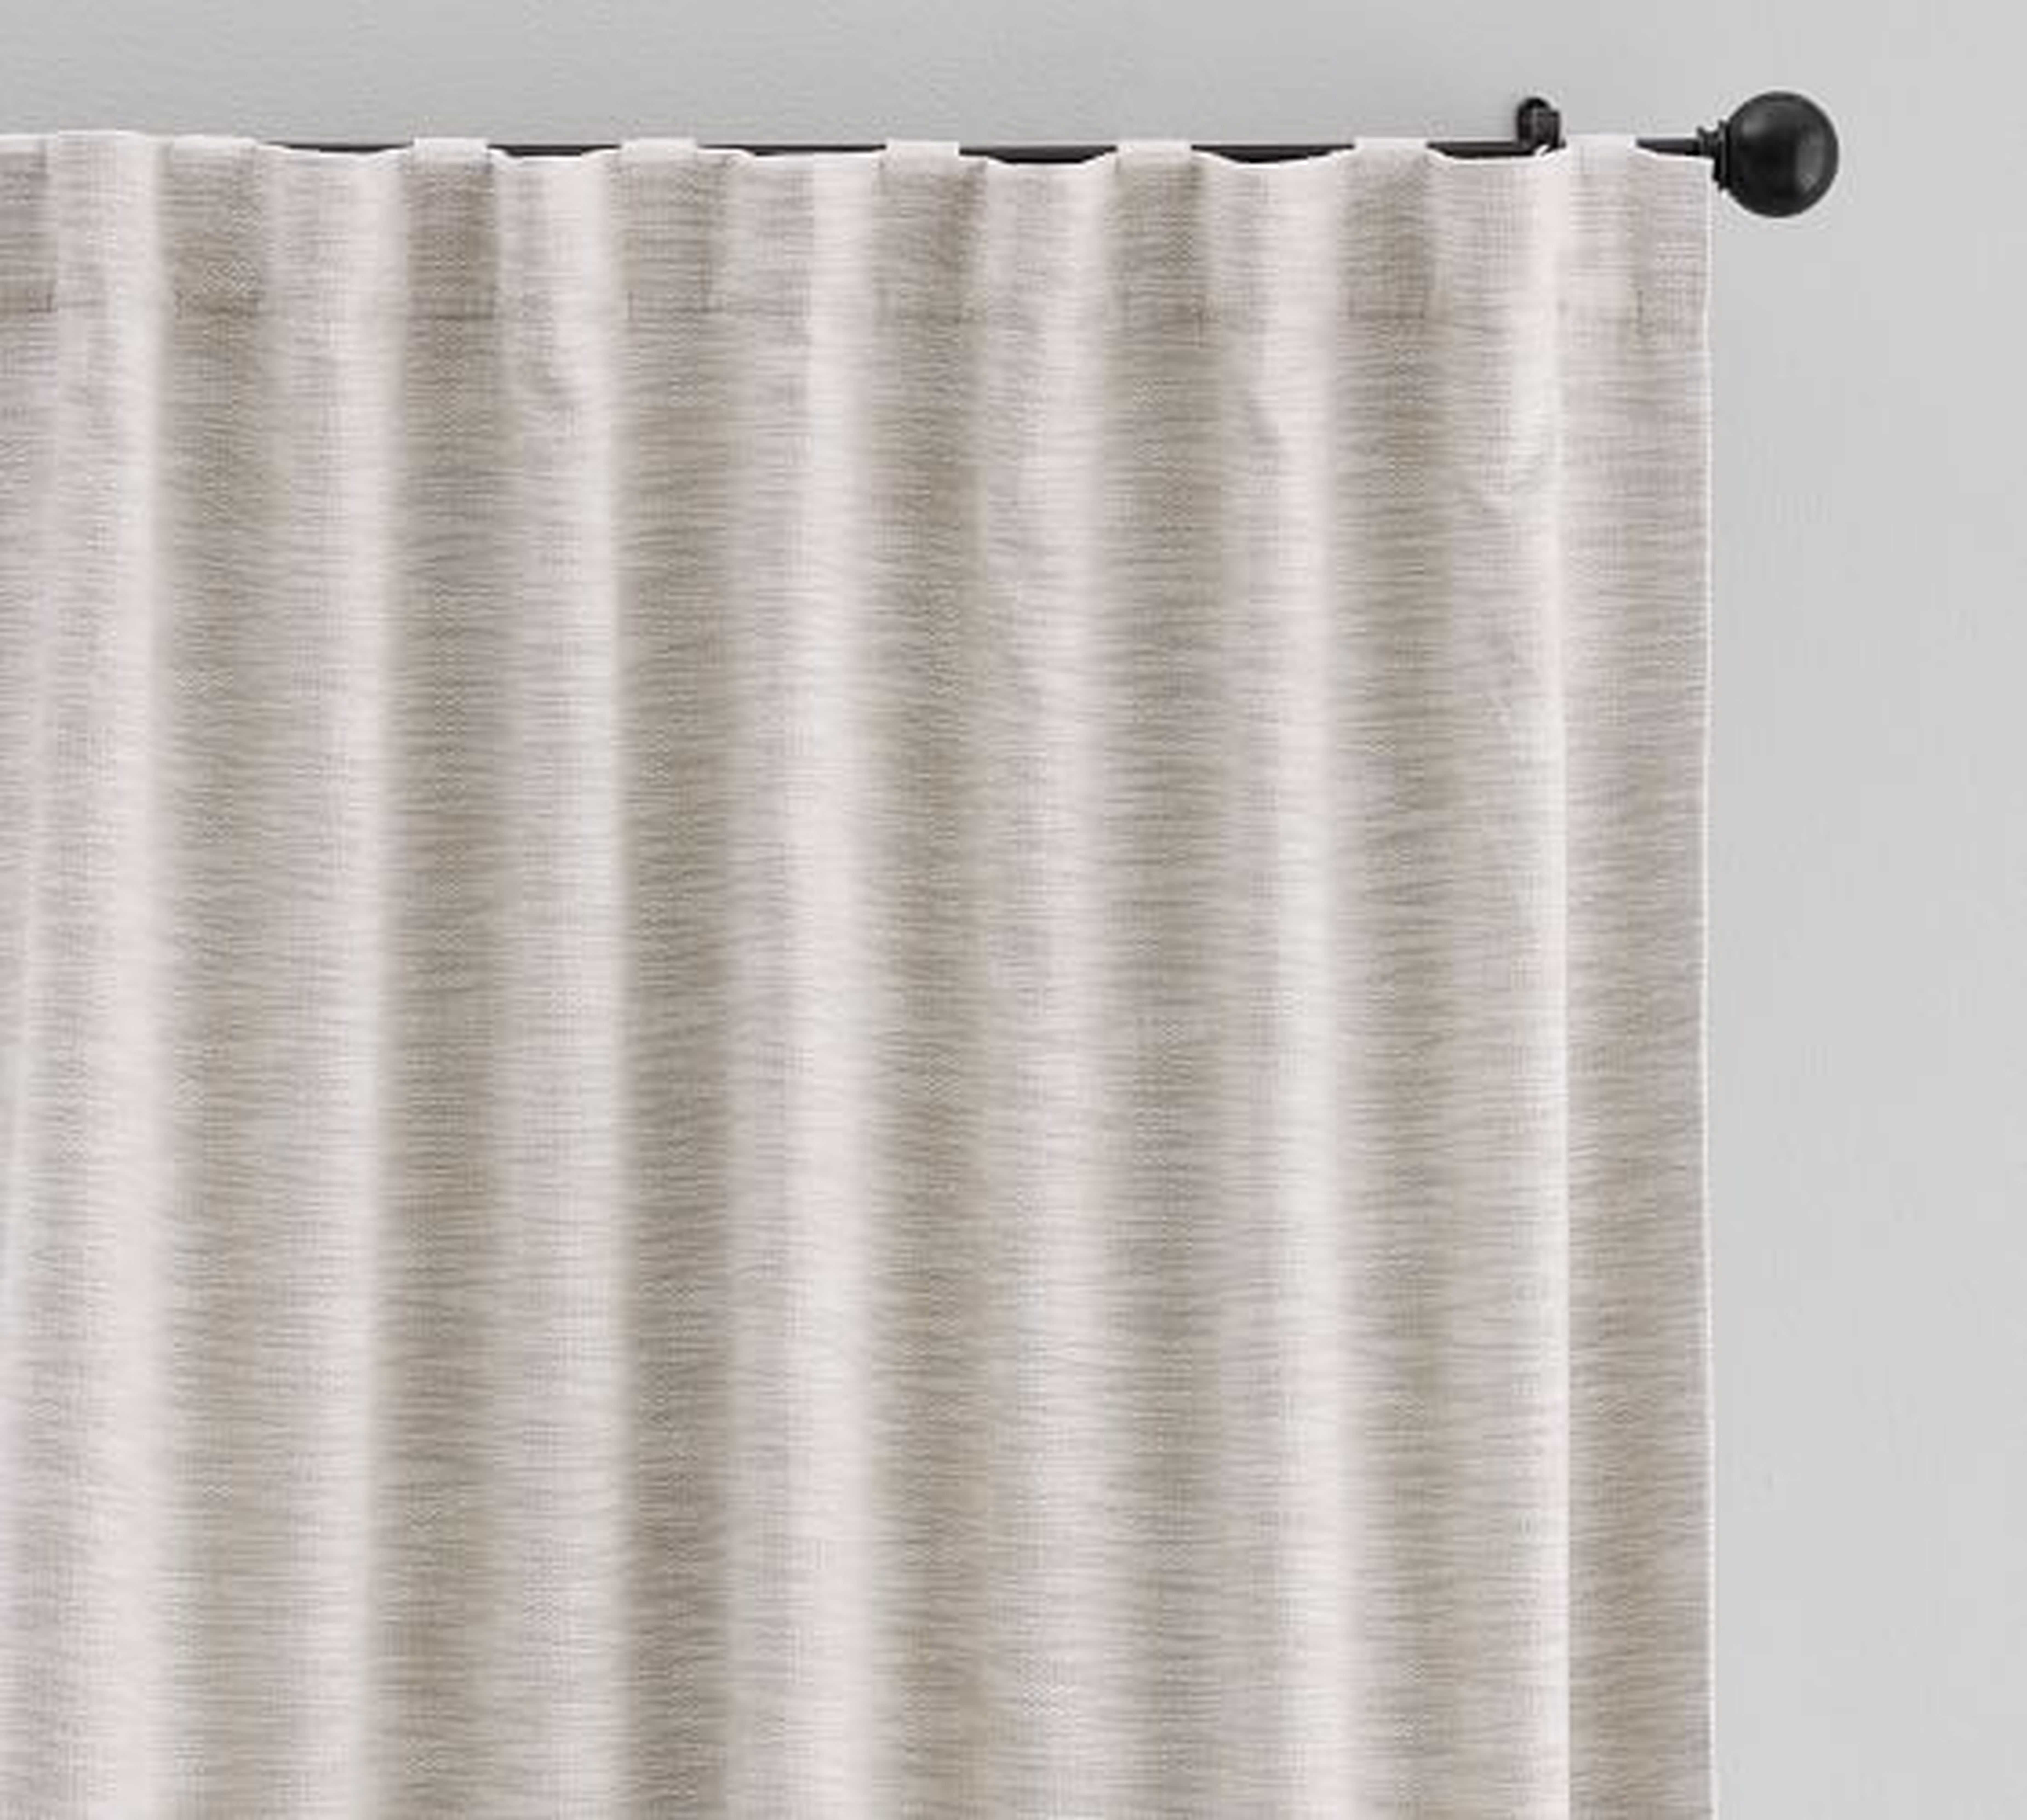 SEATON TEXTURED CURTAIN - Neutral - Black Out - 108" - Pottery Barn